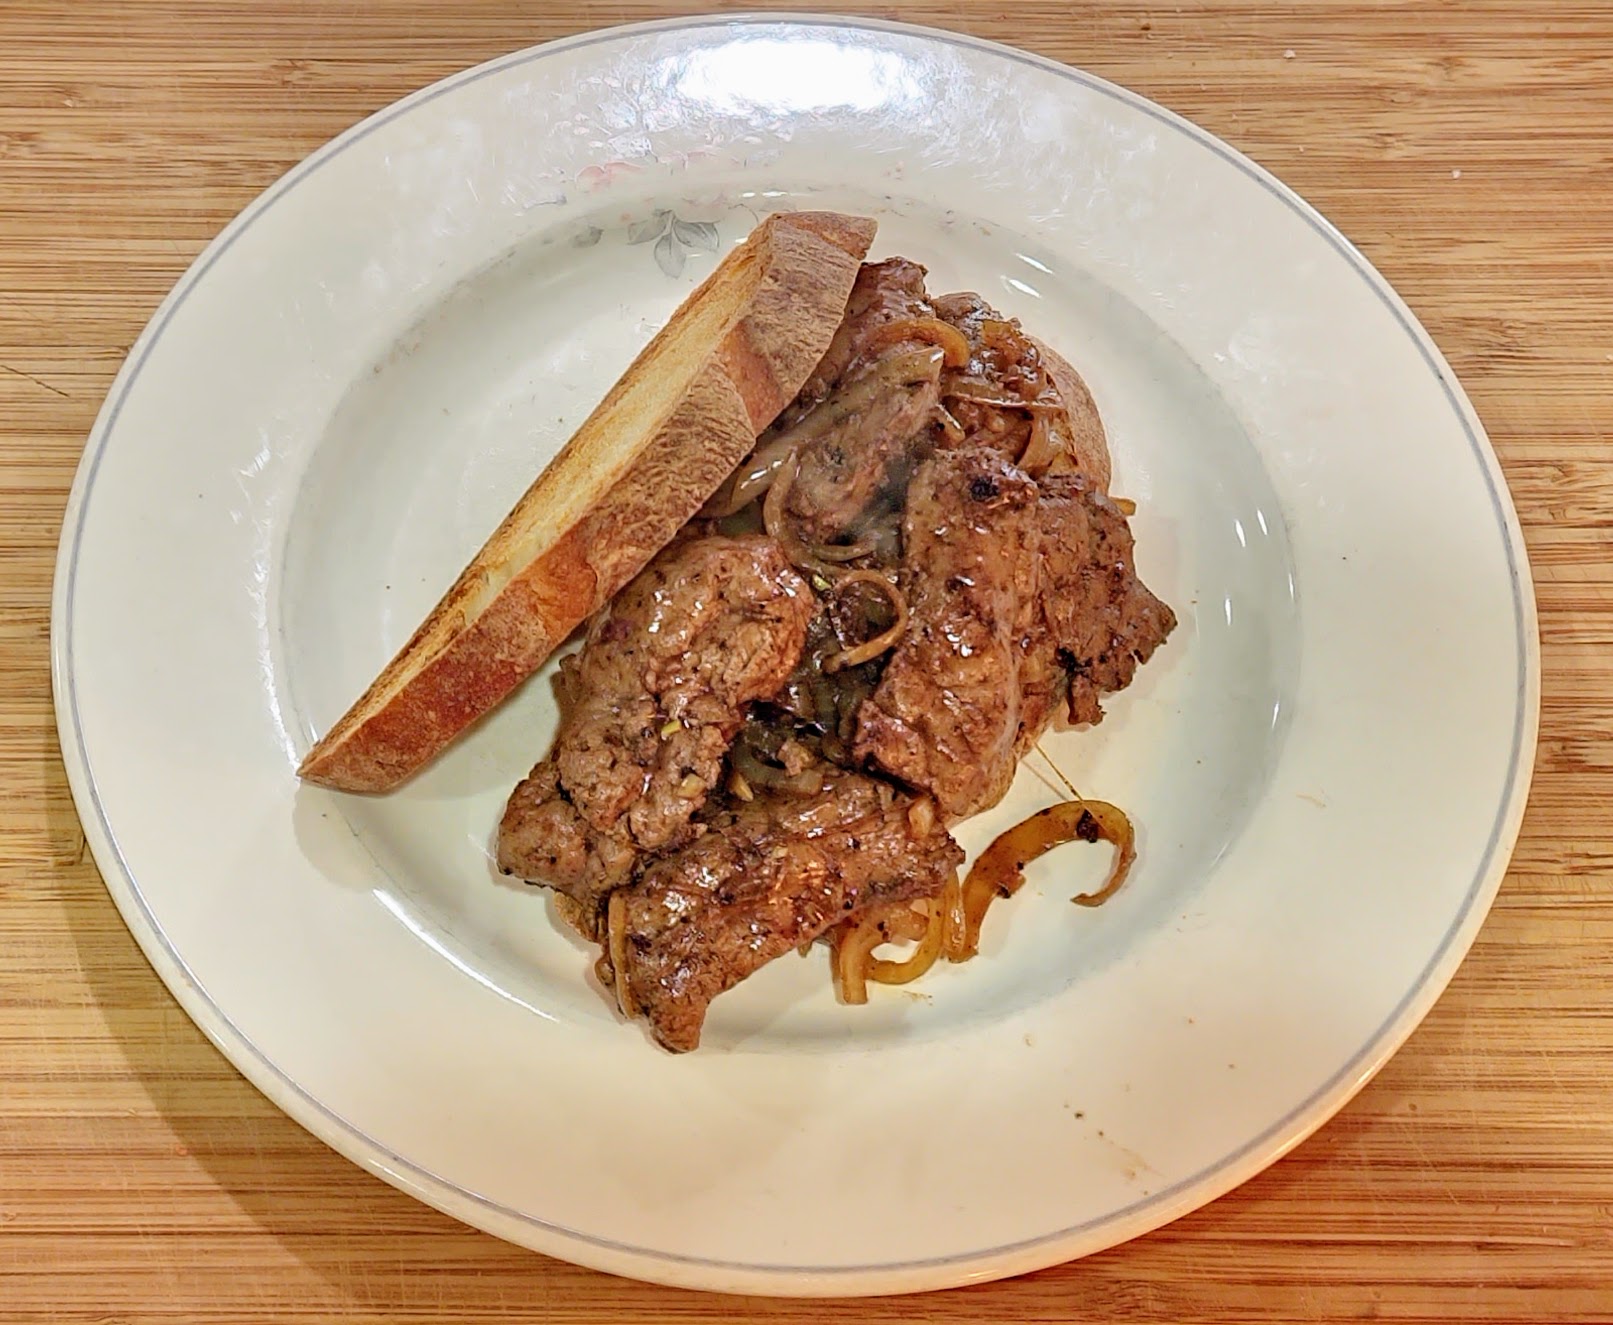 Liver & Onions, on Bread